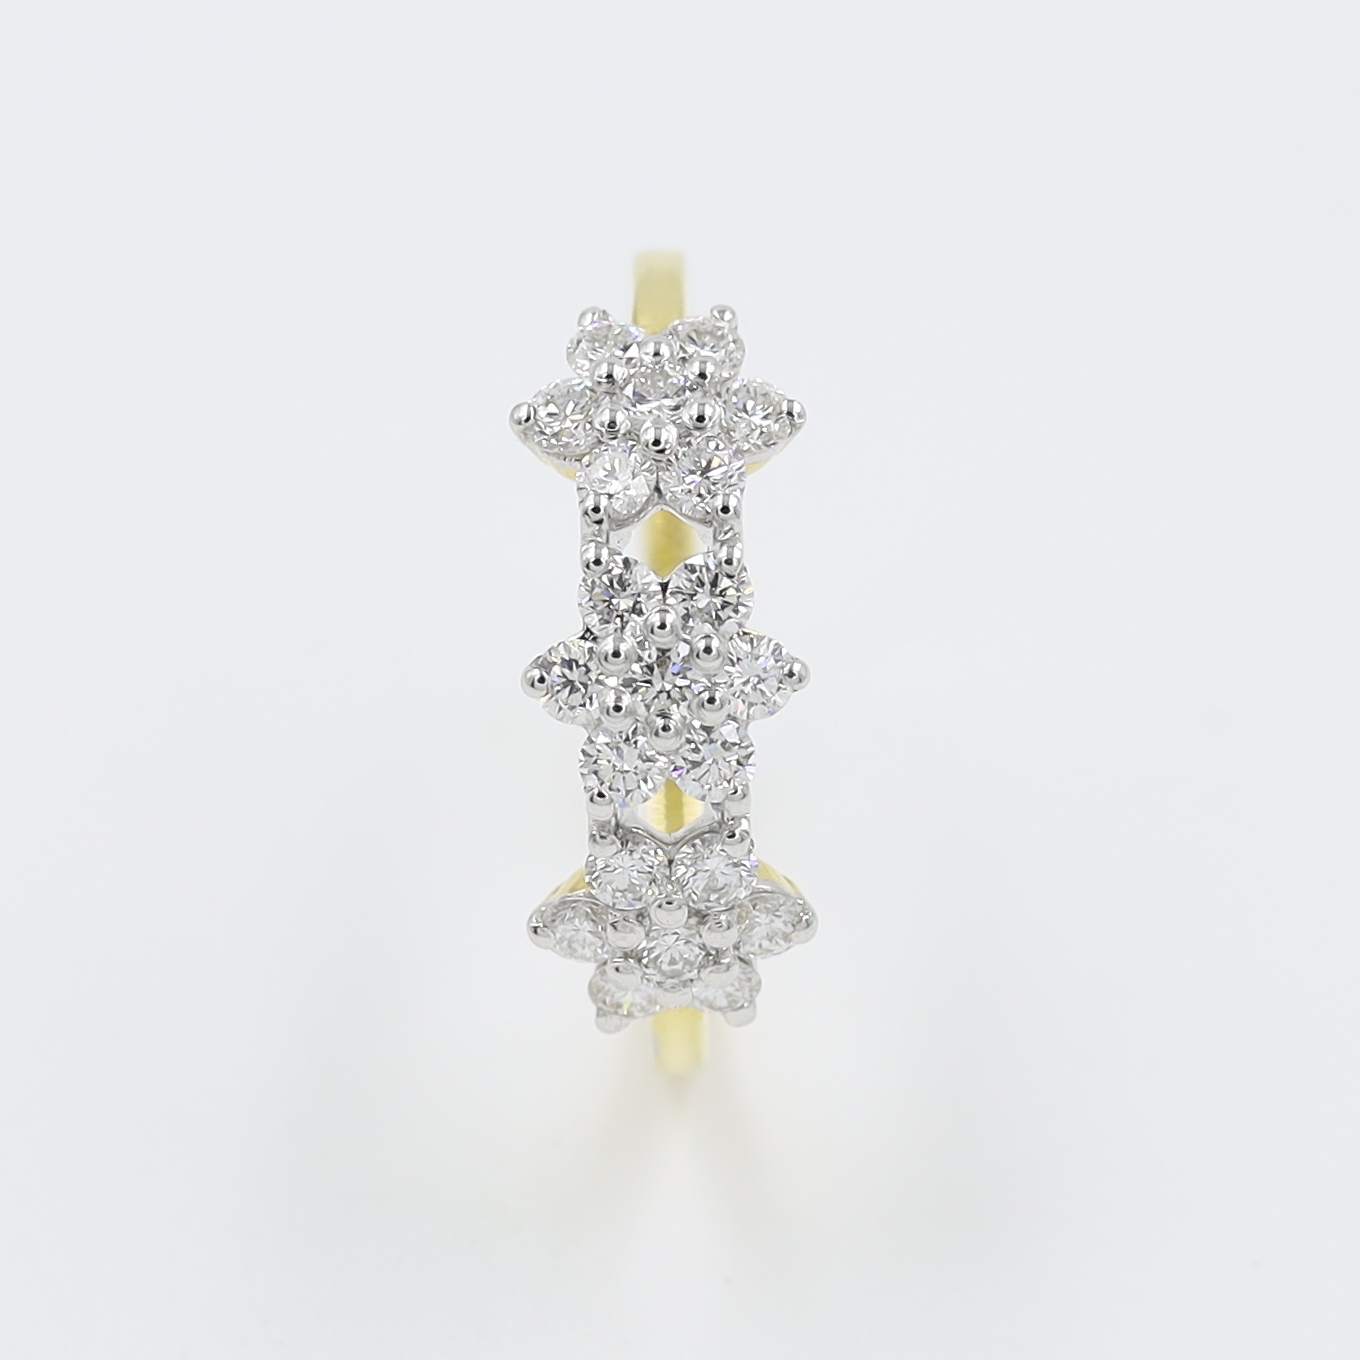 14Kt Yellow Gold Daimond Ring with Stars Beautifully Studded With Natral Diamonds